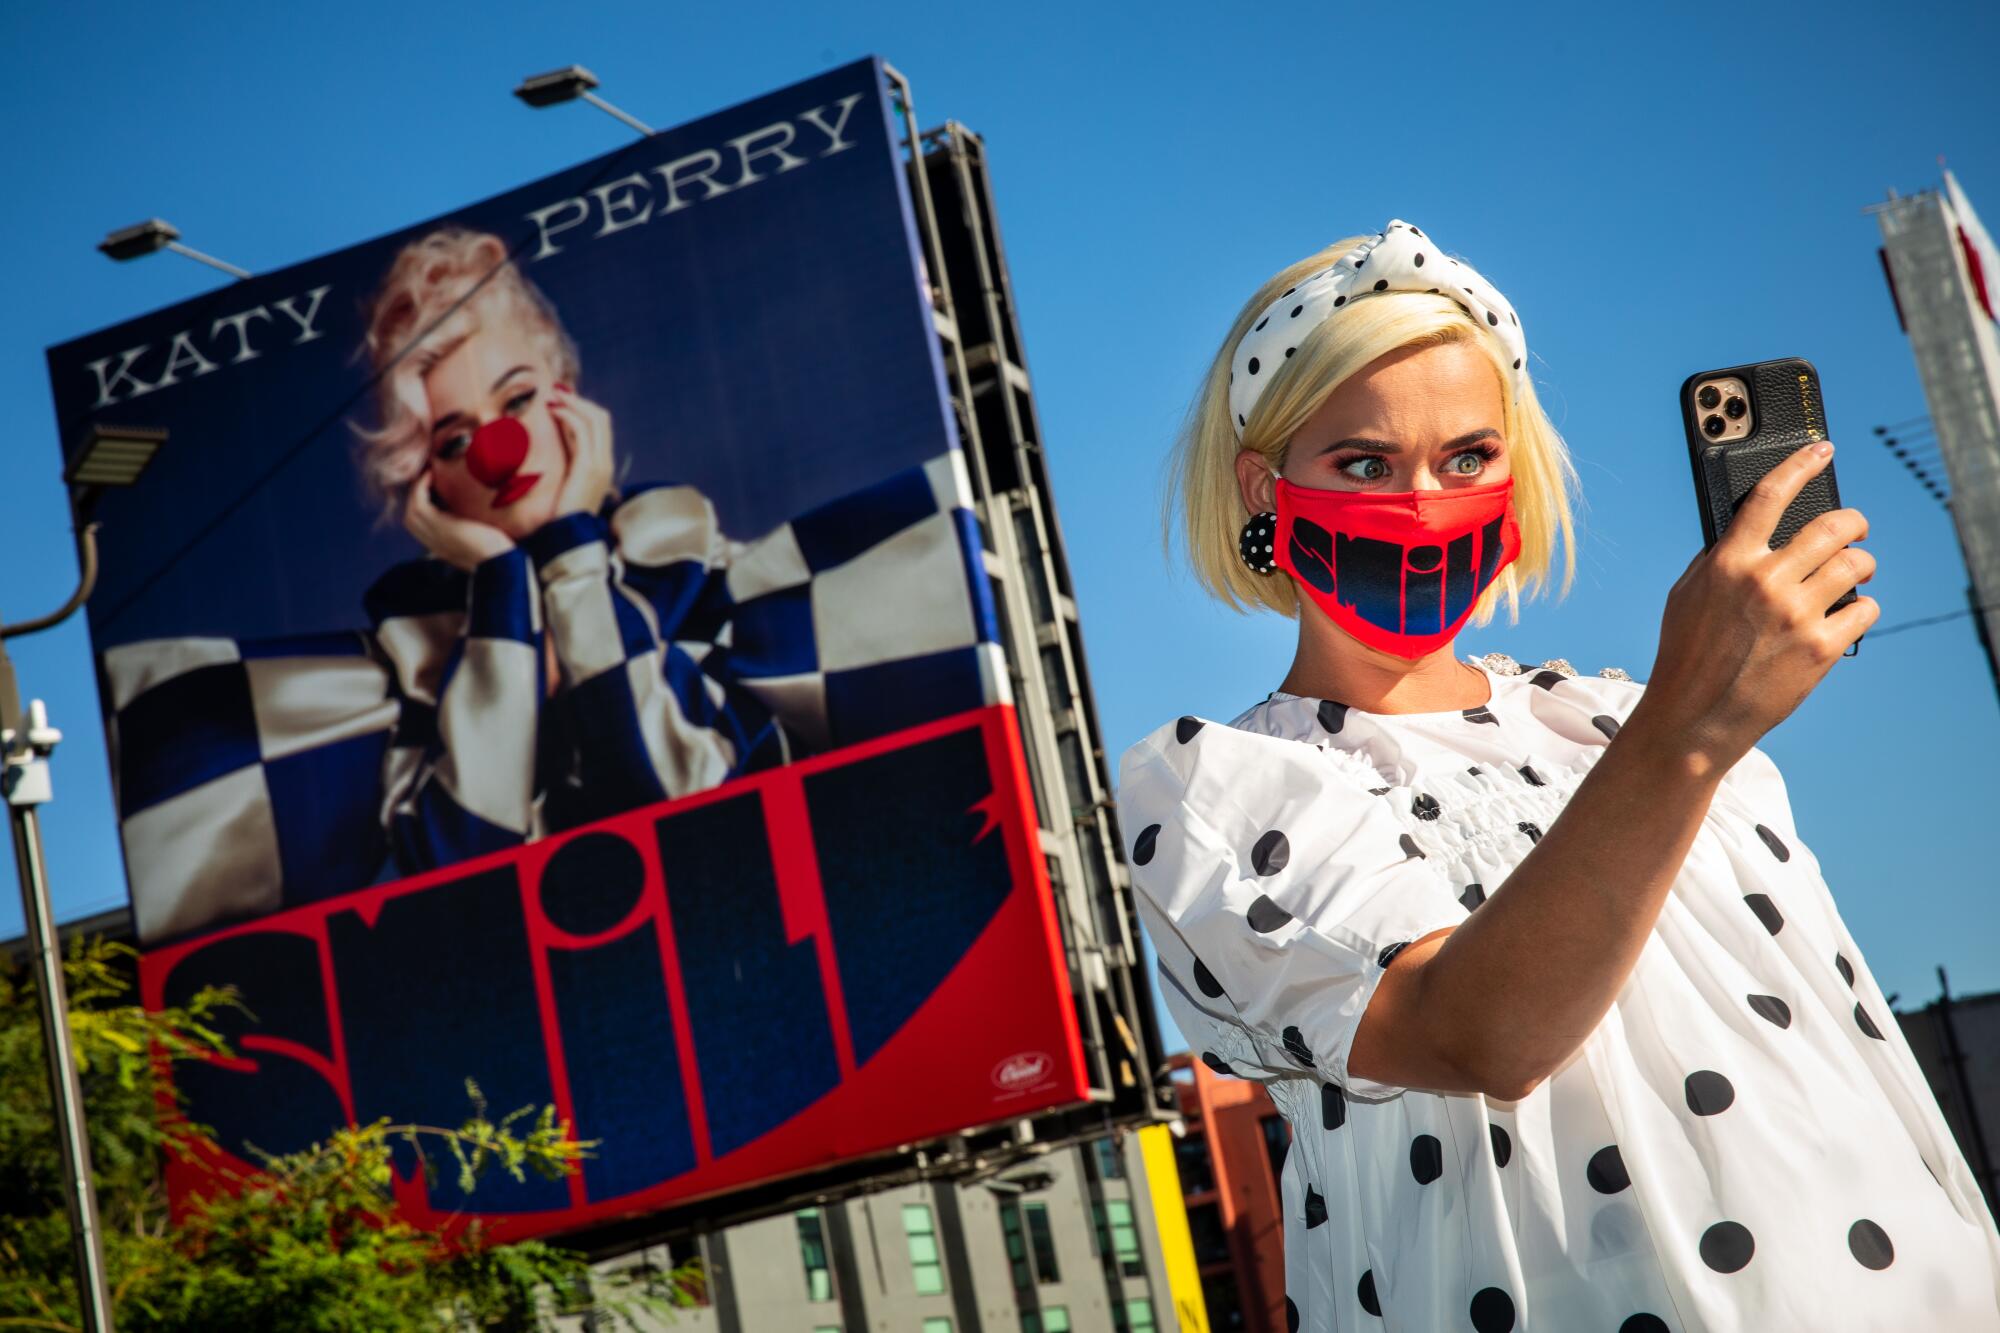 Pop star Katy Perry, in a mask that says "smile," takes a selfie with a billboard of herself wearing a red clown nose.